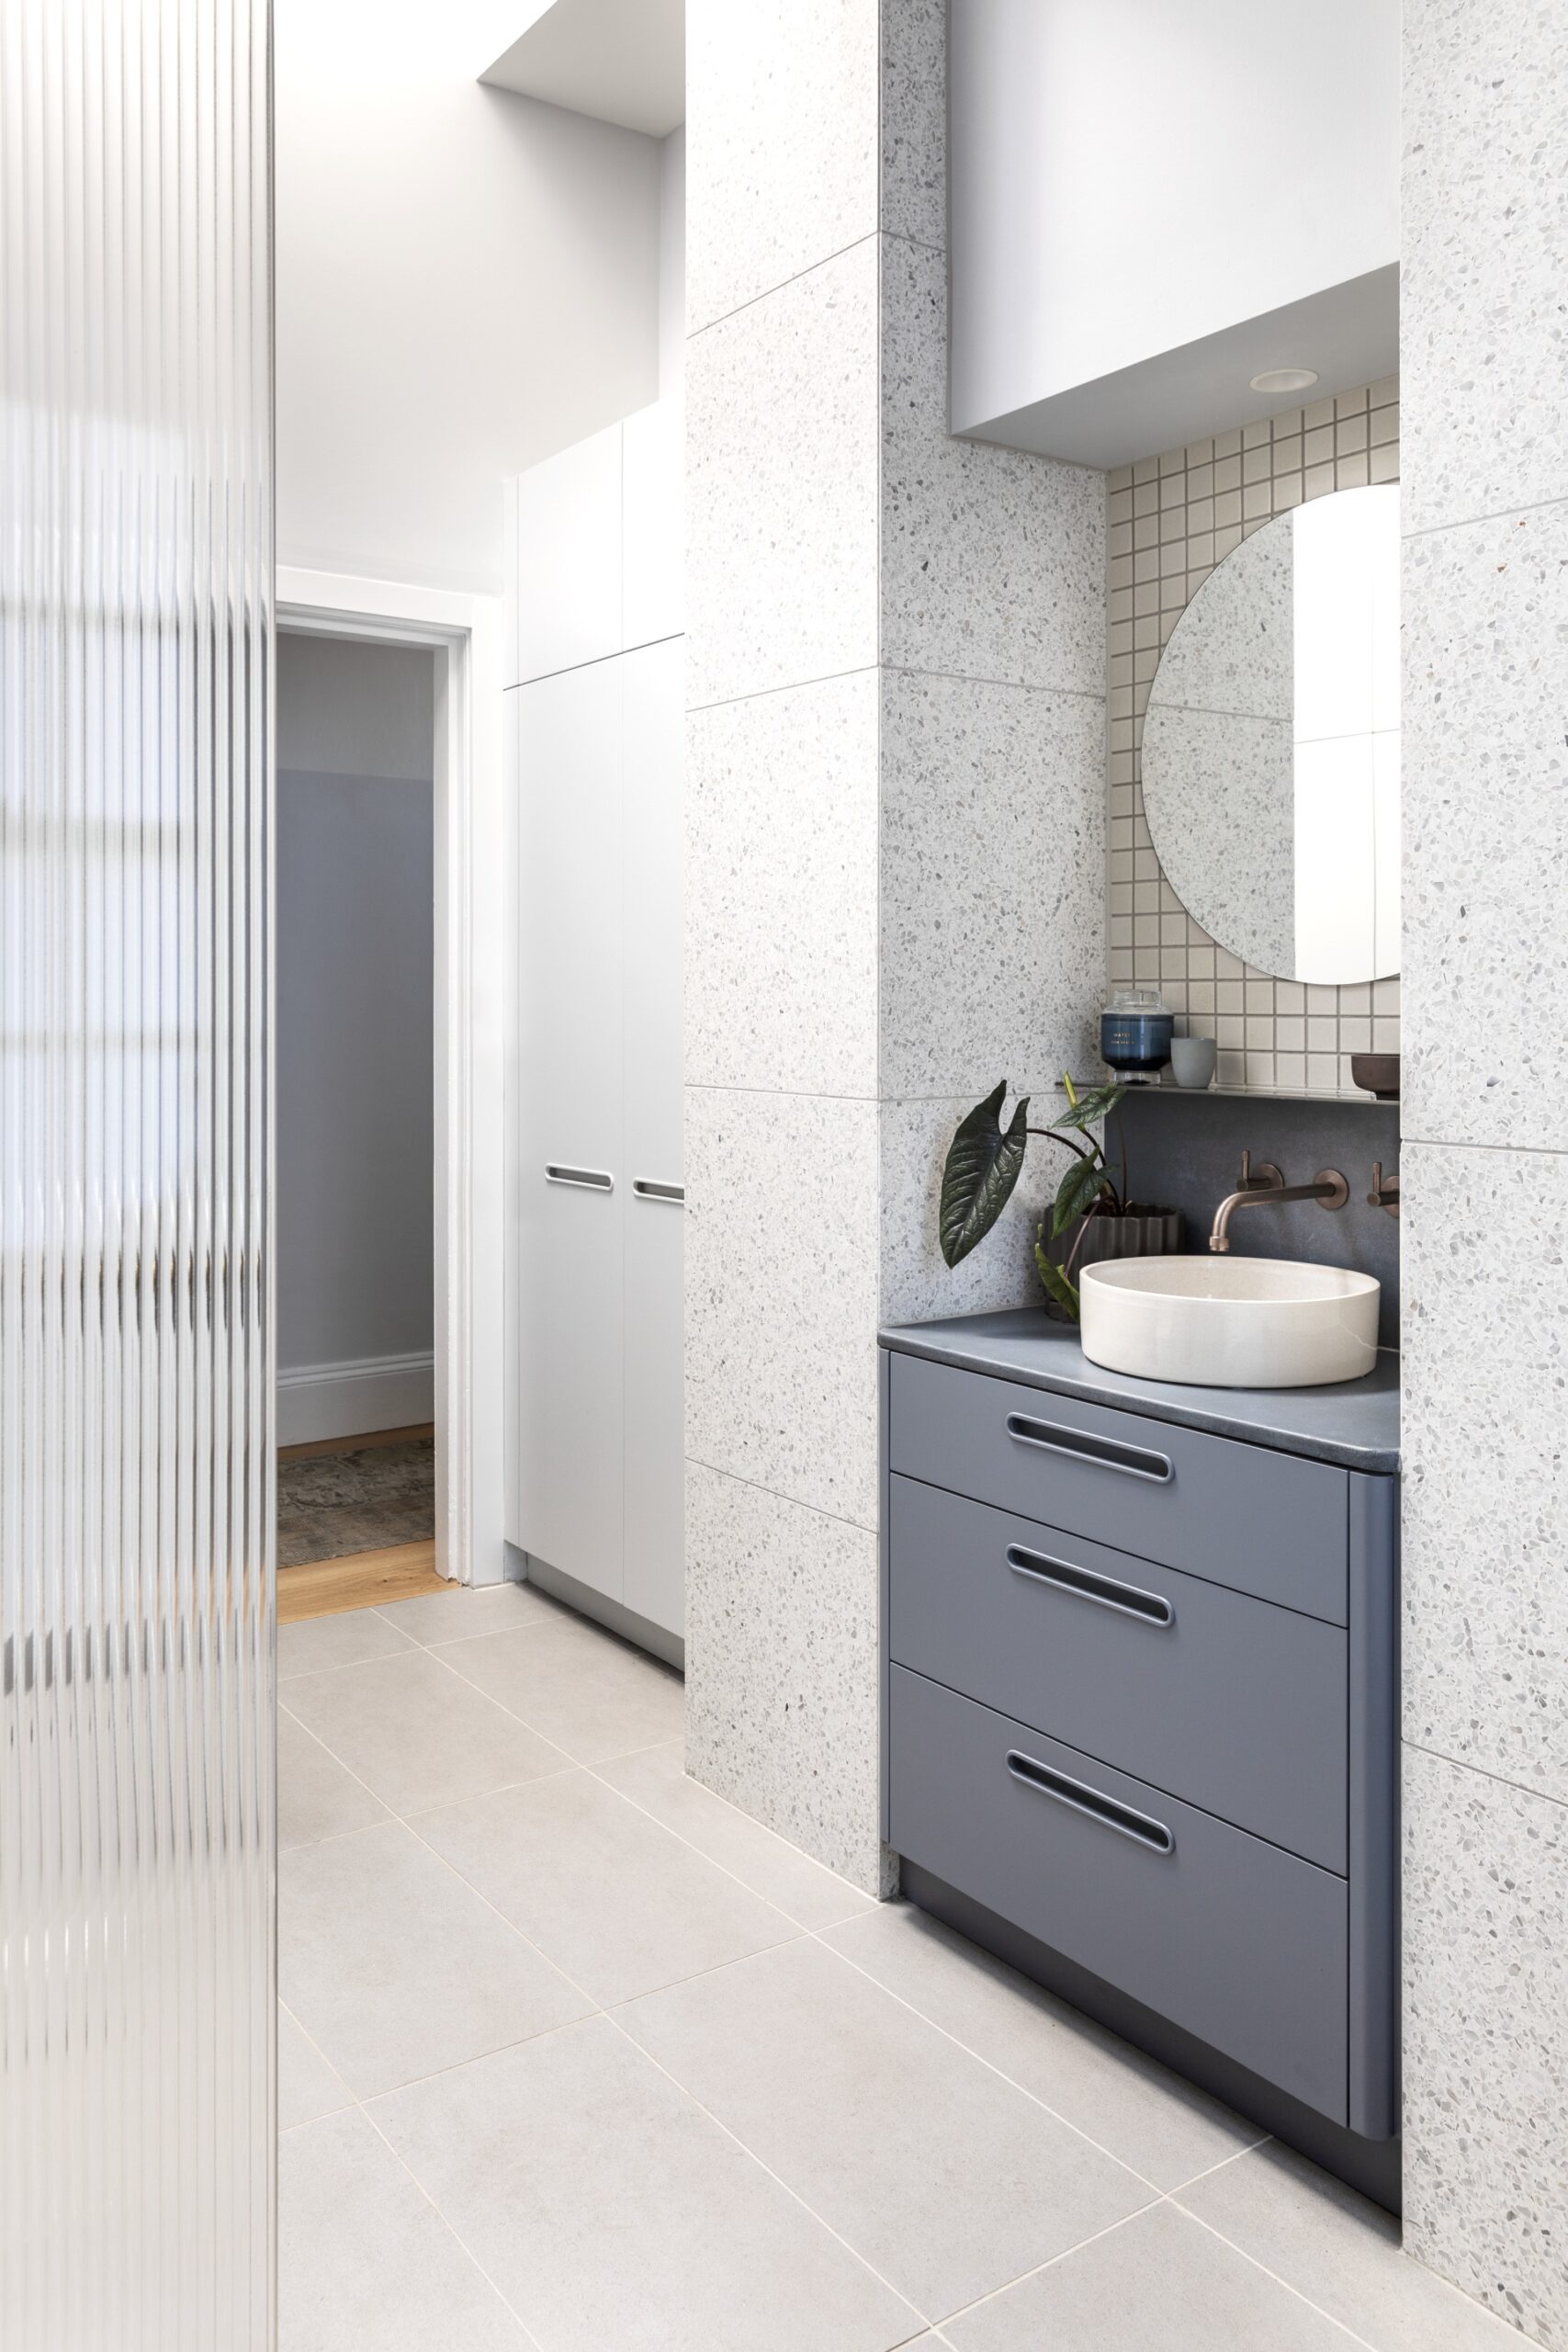 4 budget bathroom renovation ideas that will cost you less than $1000